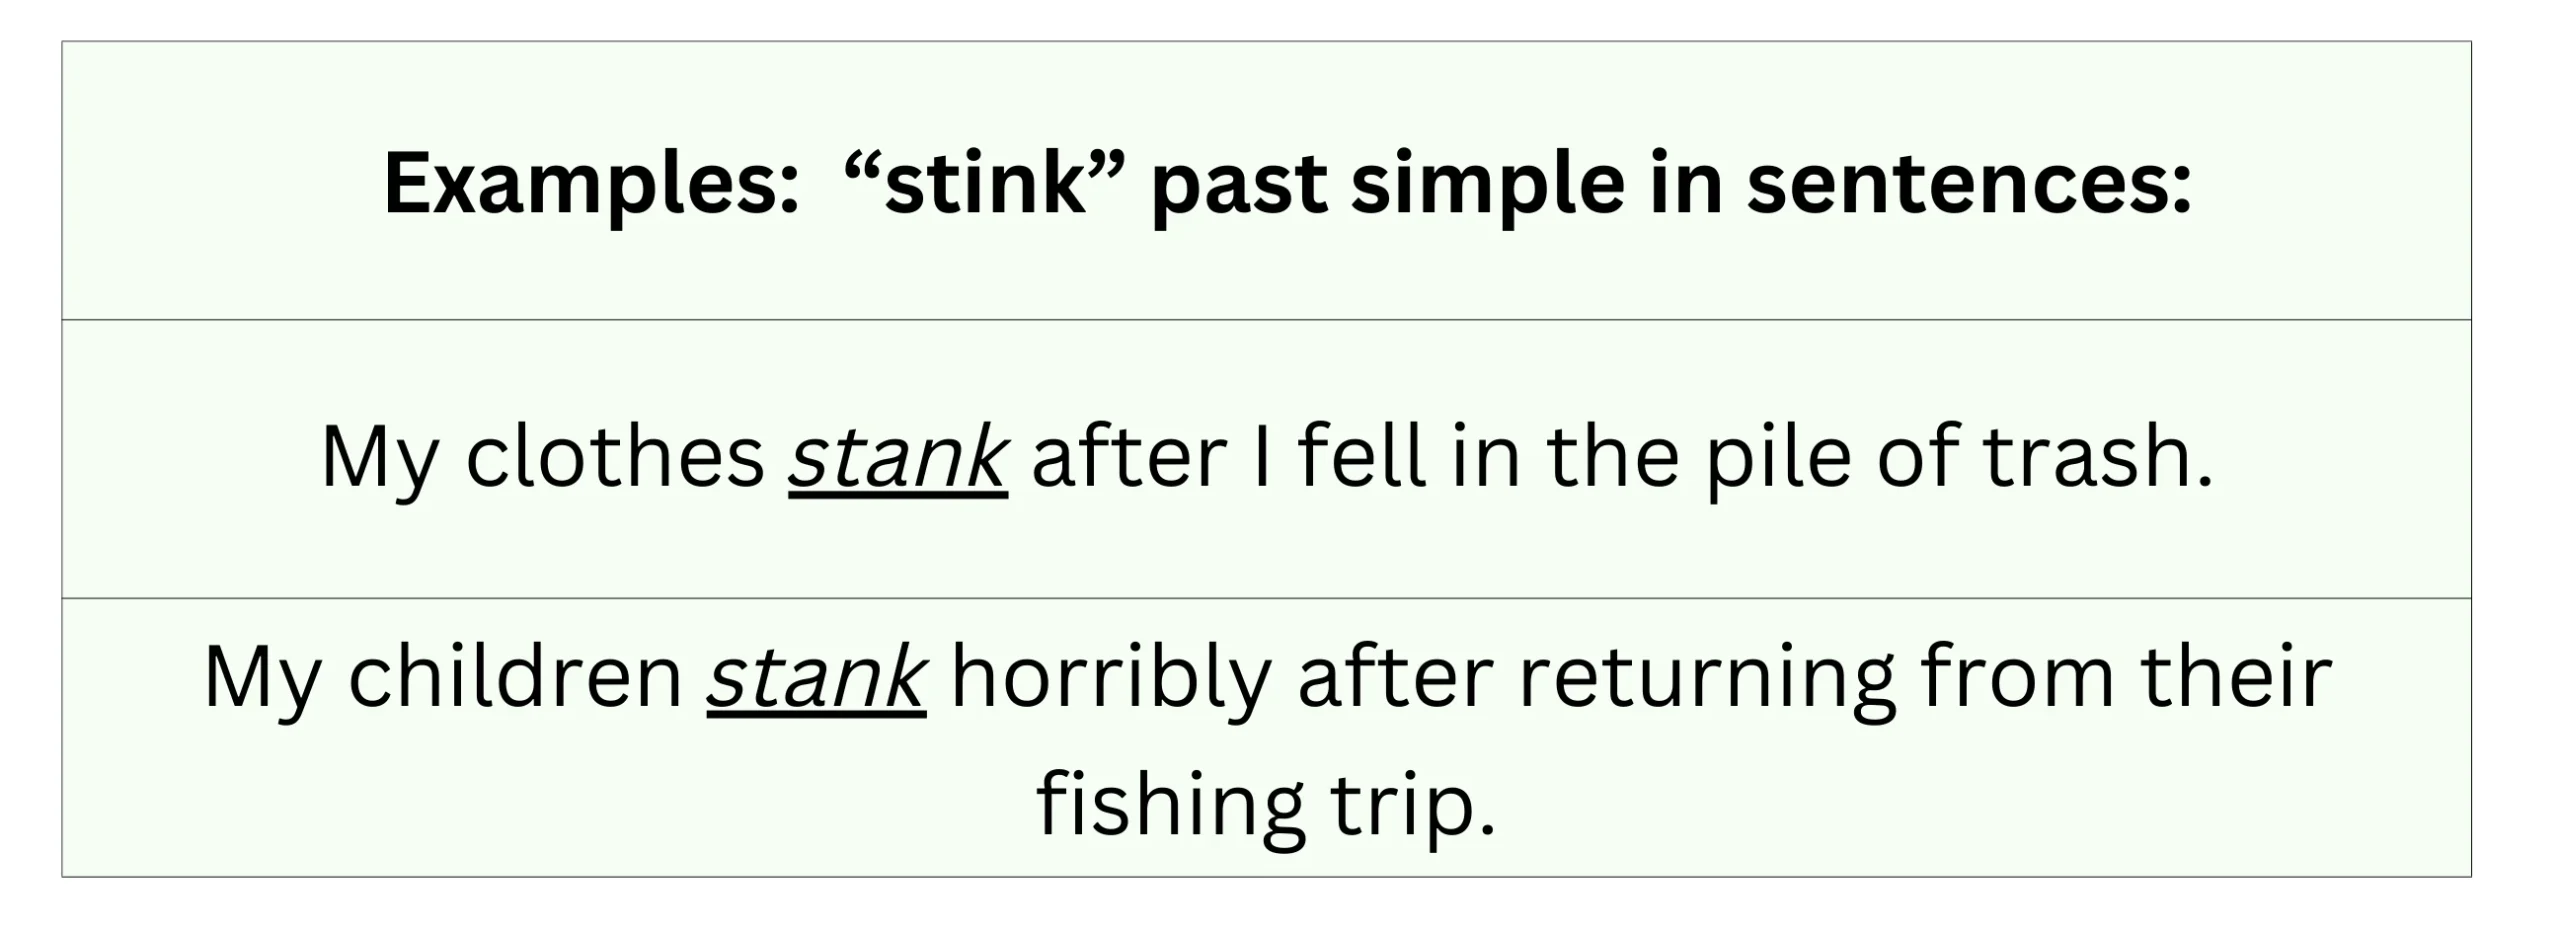 Stink, Stank, Stunk: Sniffing Out The Differences